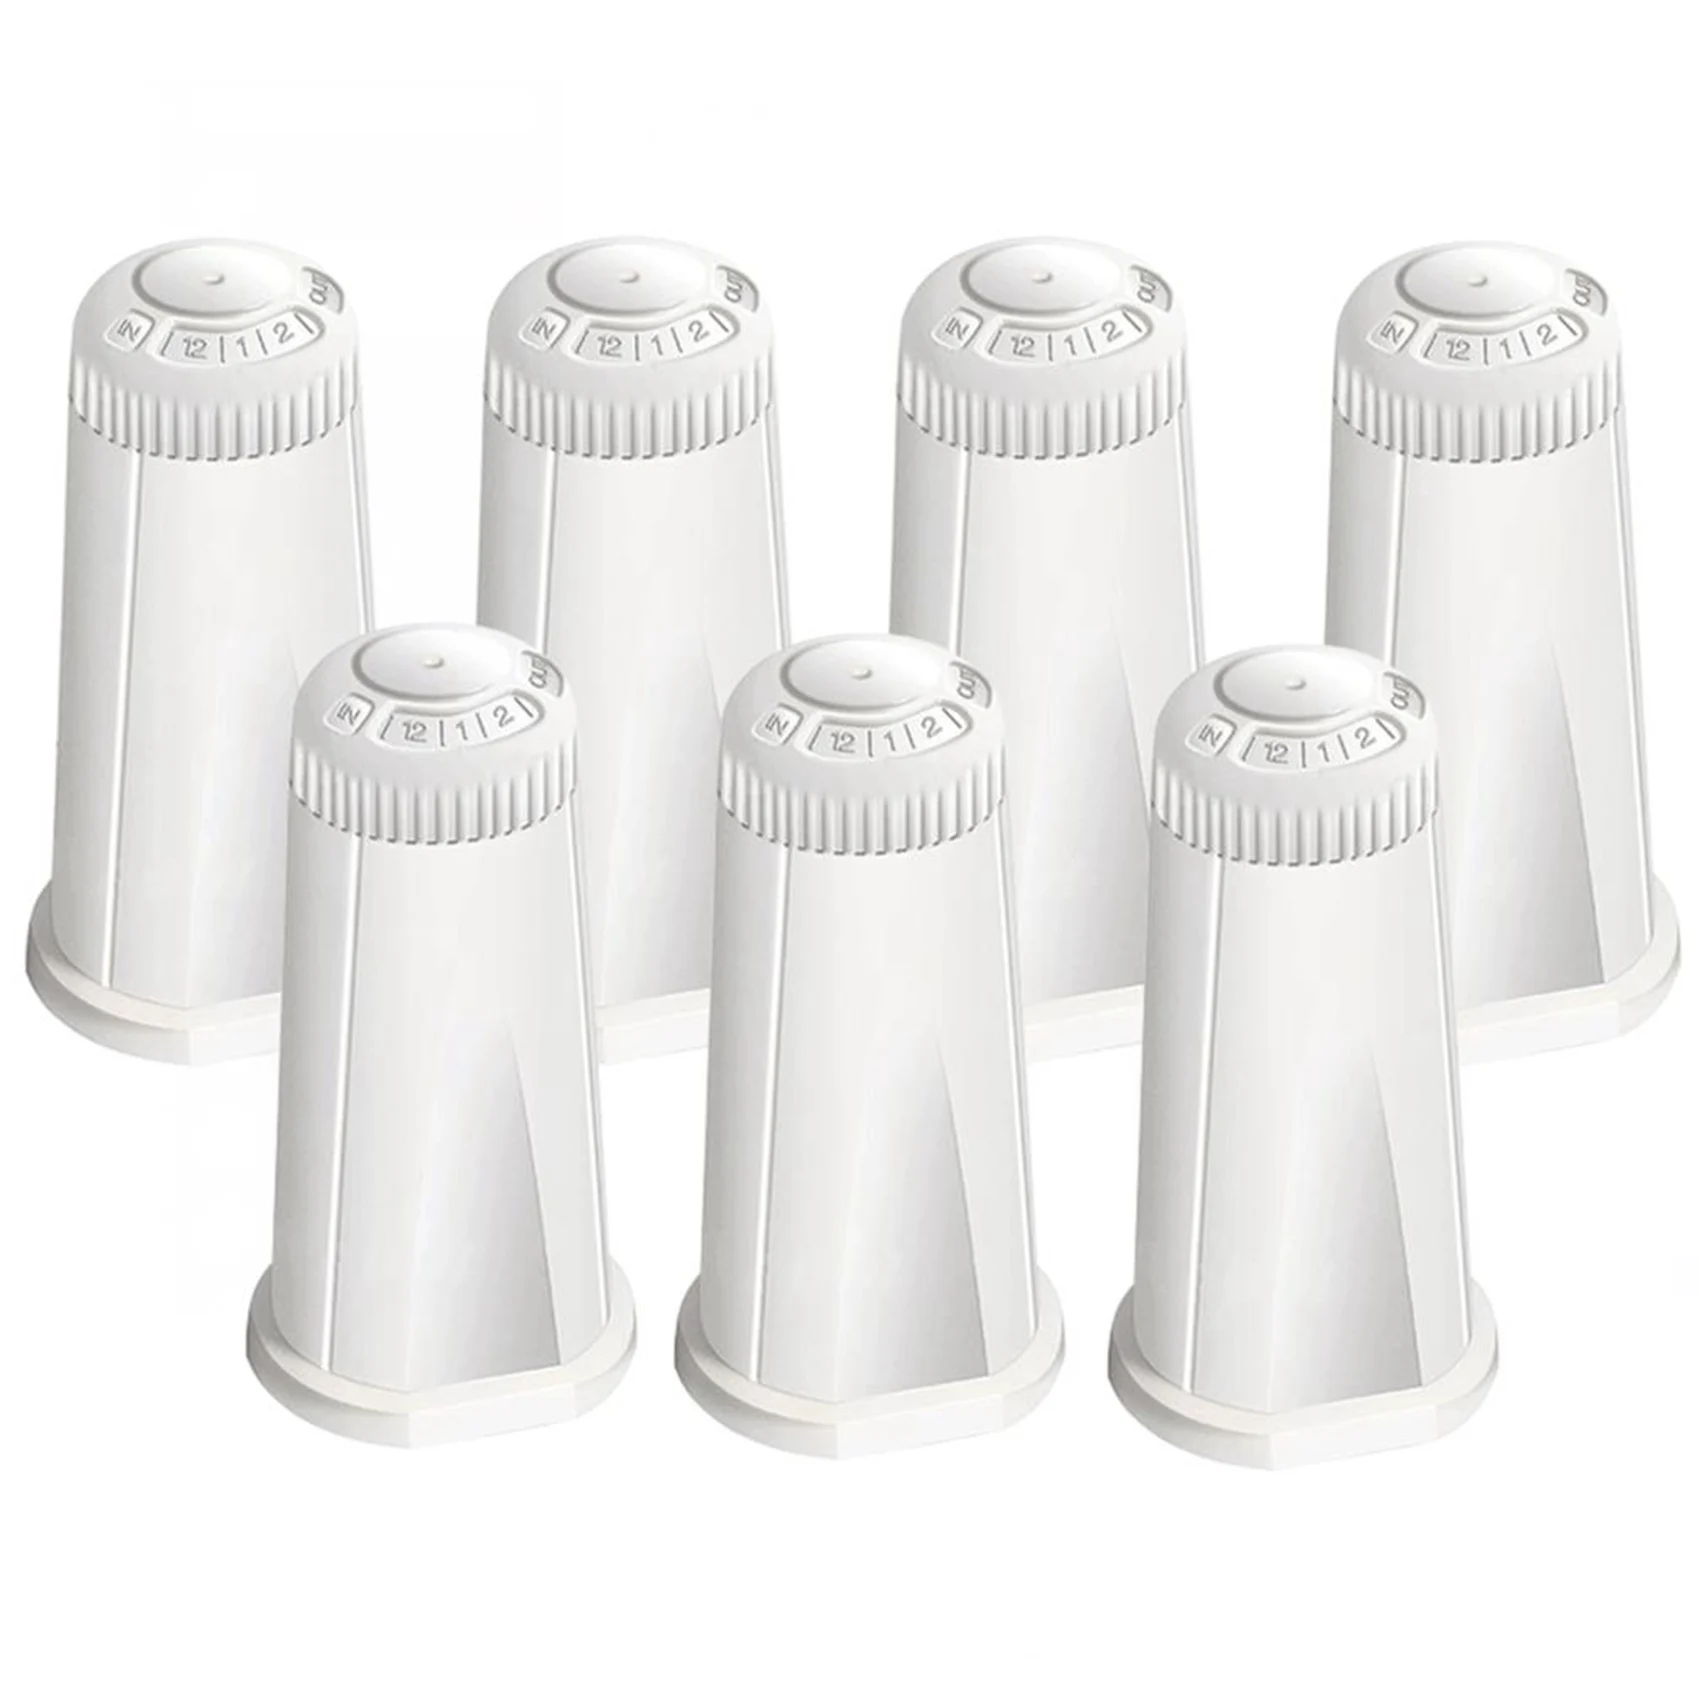 

7Pcs Replacement Water Filter for Breville Claro Swiss Espresso Coffee Machine - Compare to Part BES008WHT0NUC1